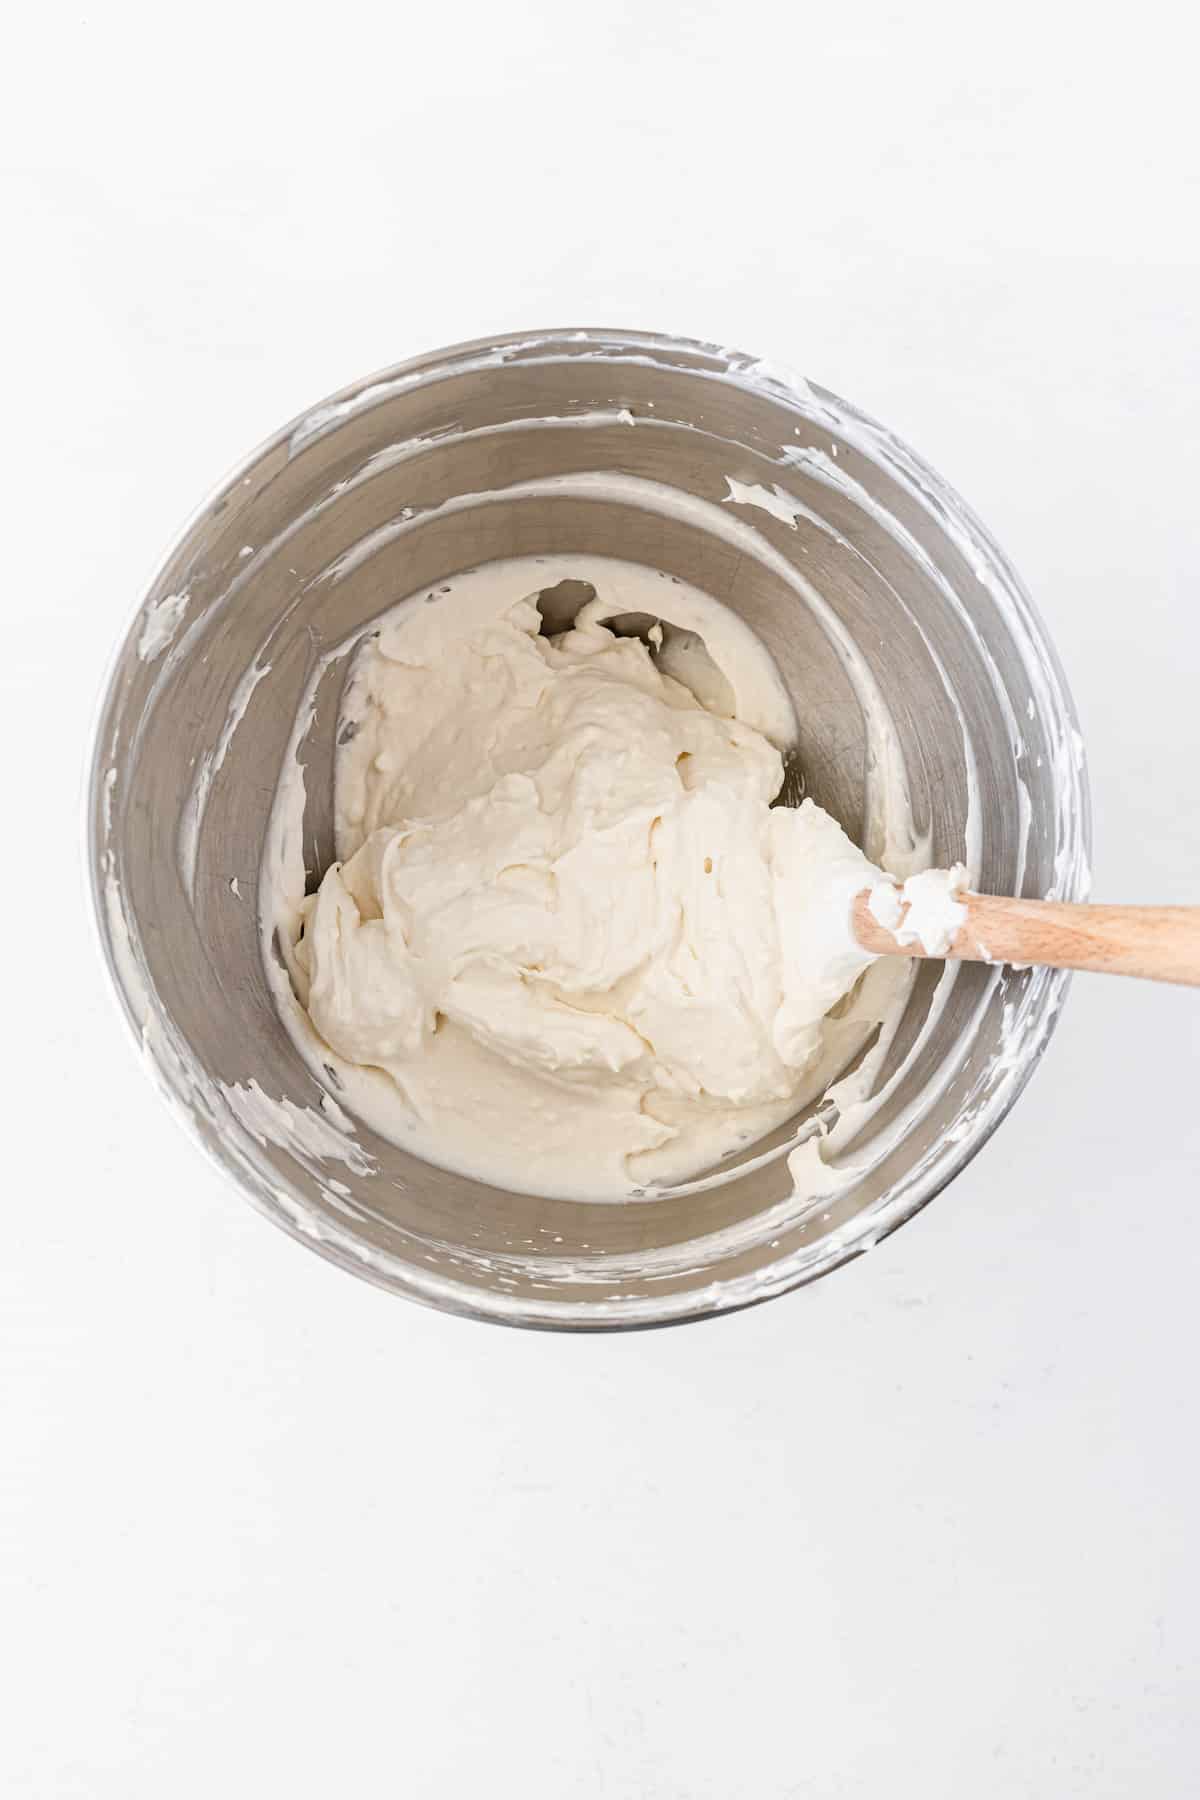 cream cheese mixture in bowl.